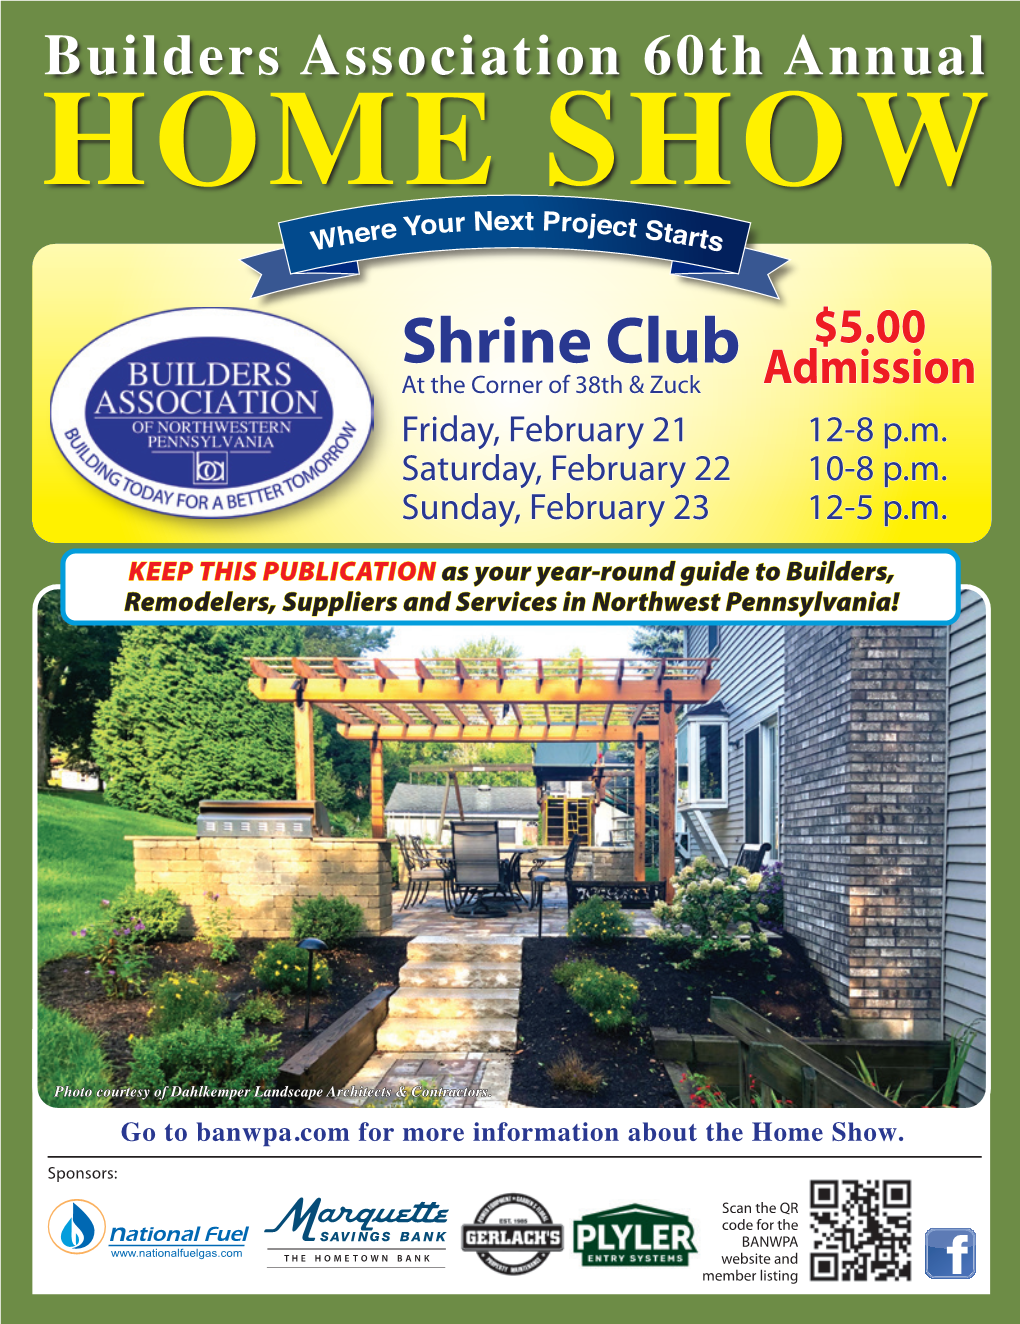 Shrine Club $5.00 at the Corner of 38Th & Zuck Admission Friday, February 21 12-8 P.M